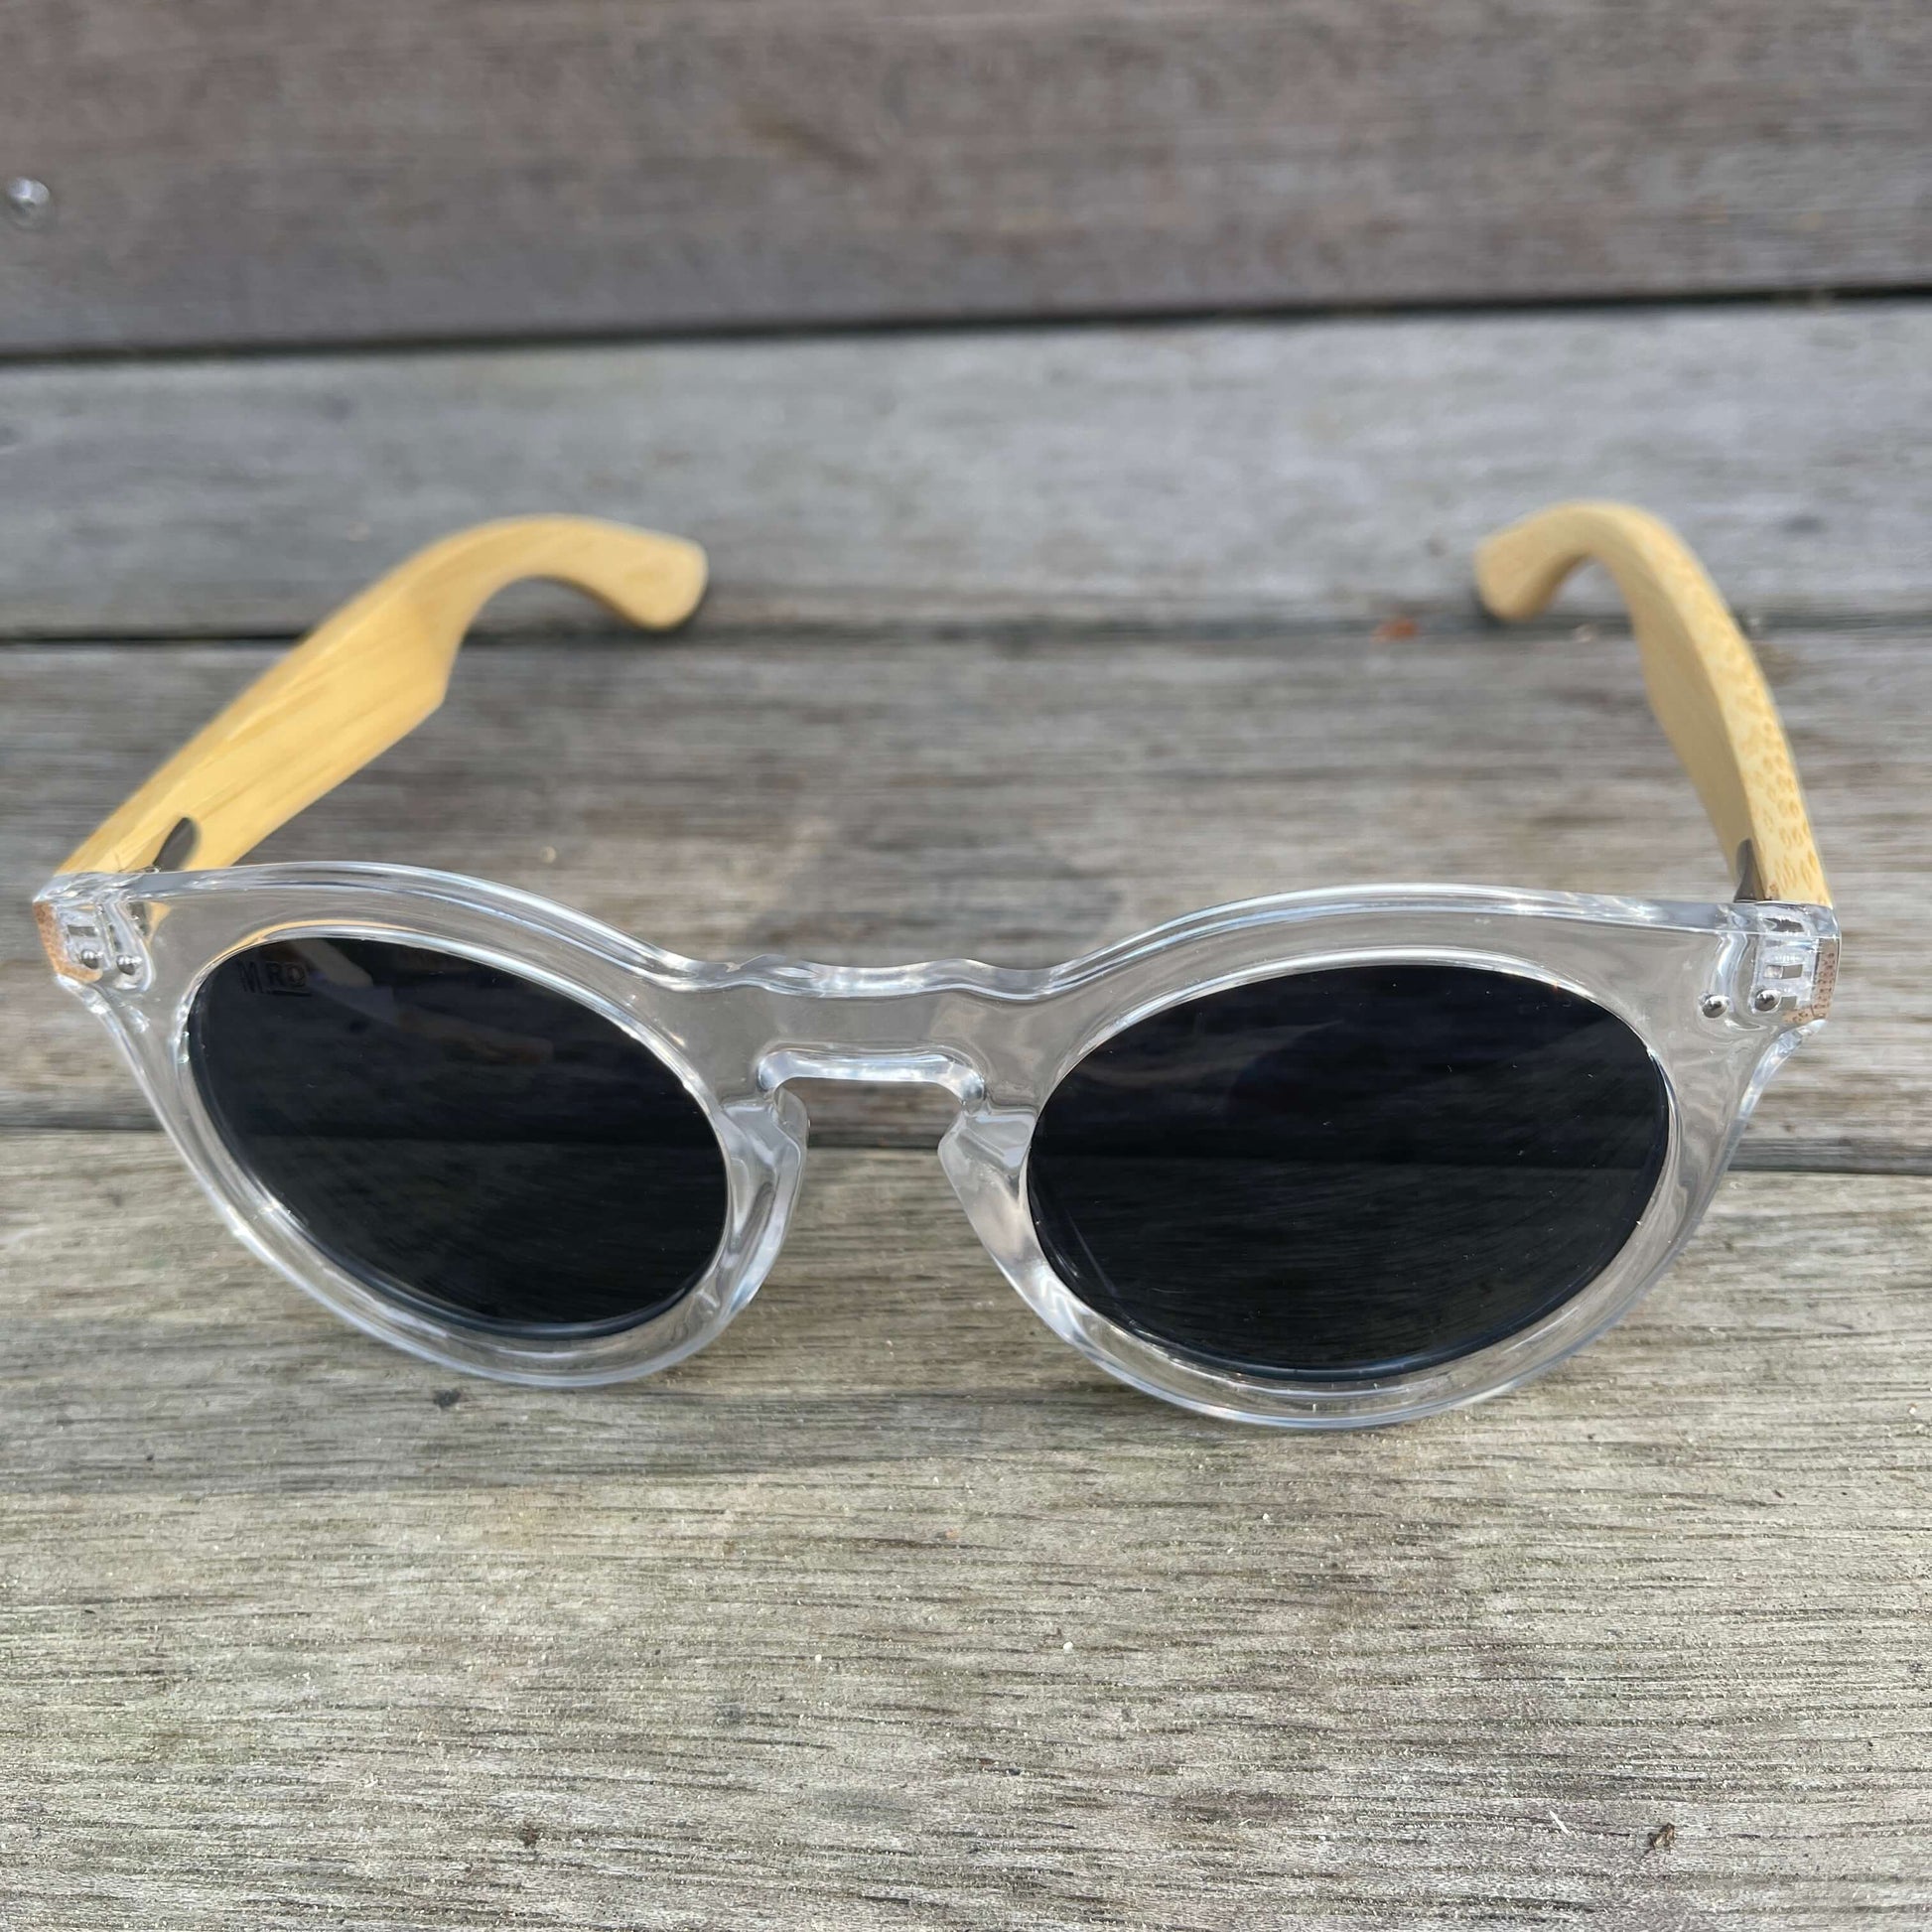 Womens sunglasses with clear frames and bamboo arms in a Grace Kelly style.